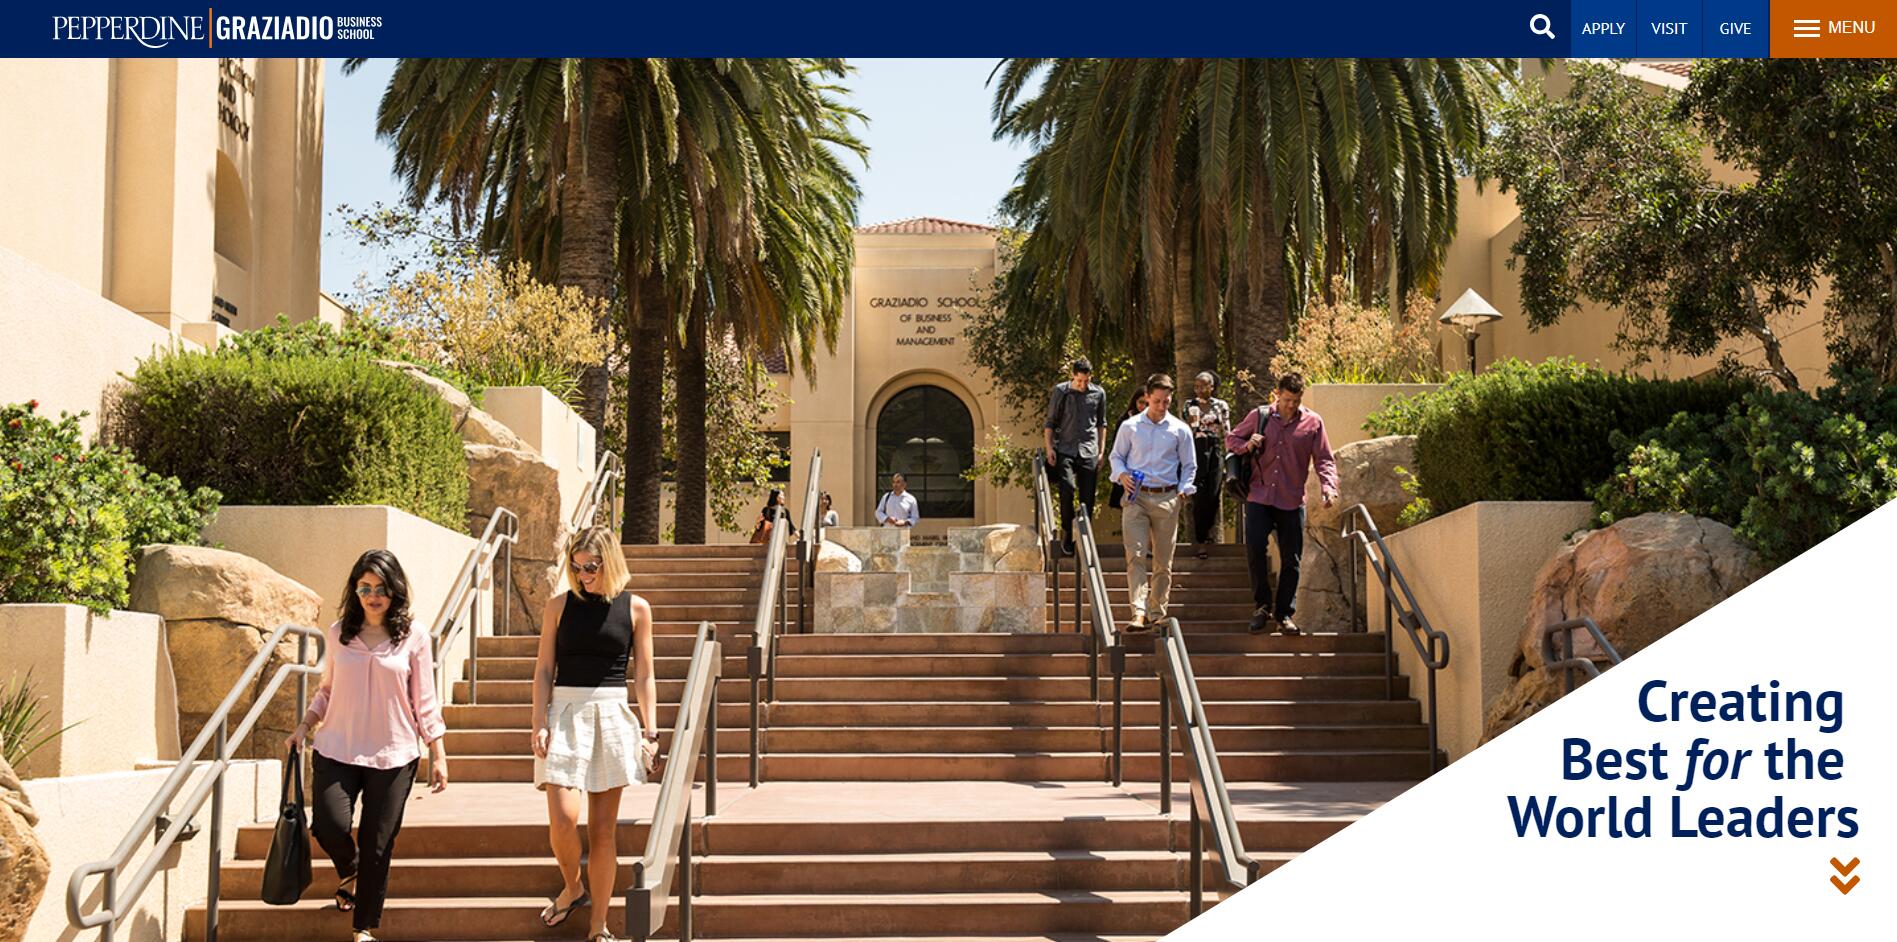 The George L. Graziadio School of Business and Management at Pepperdine University